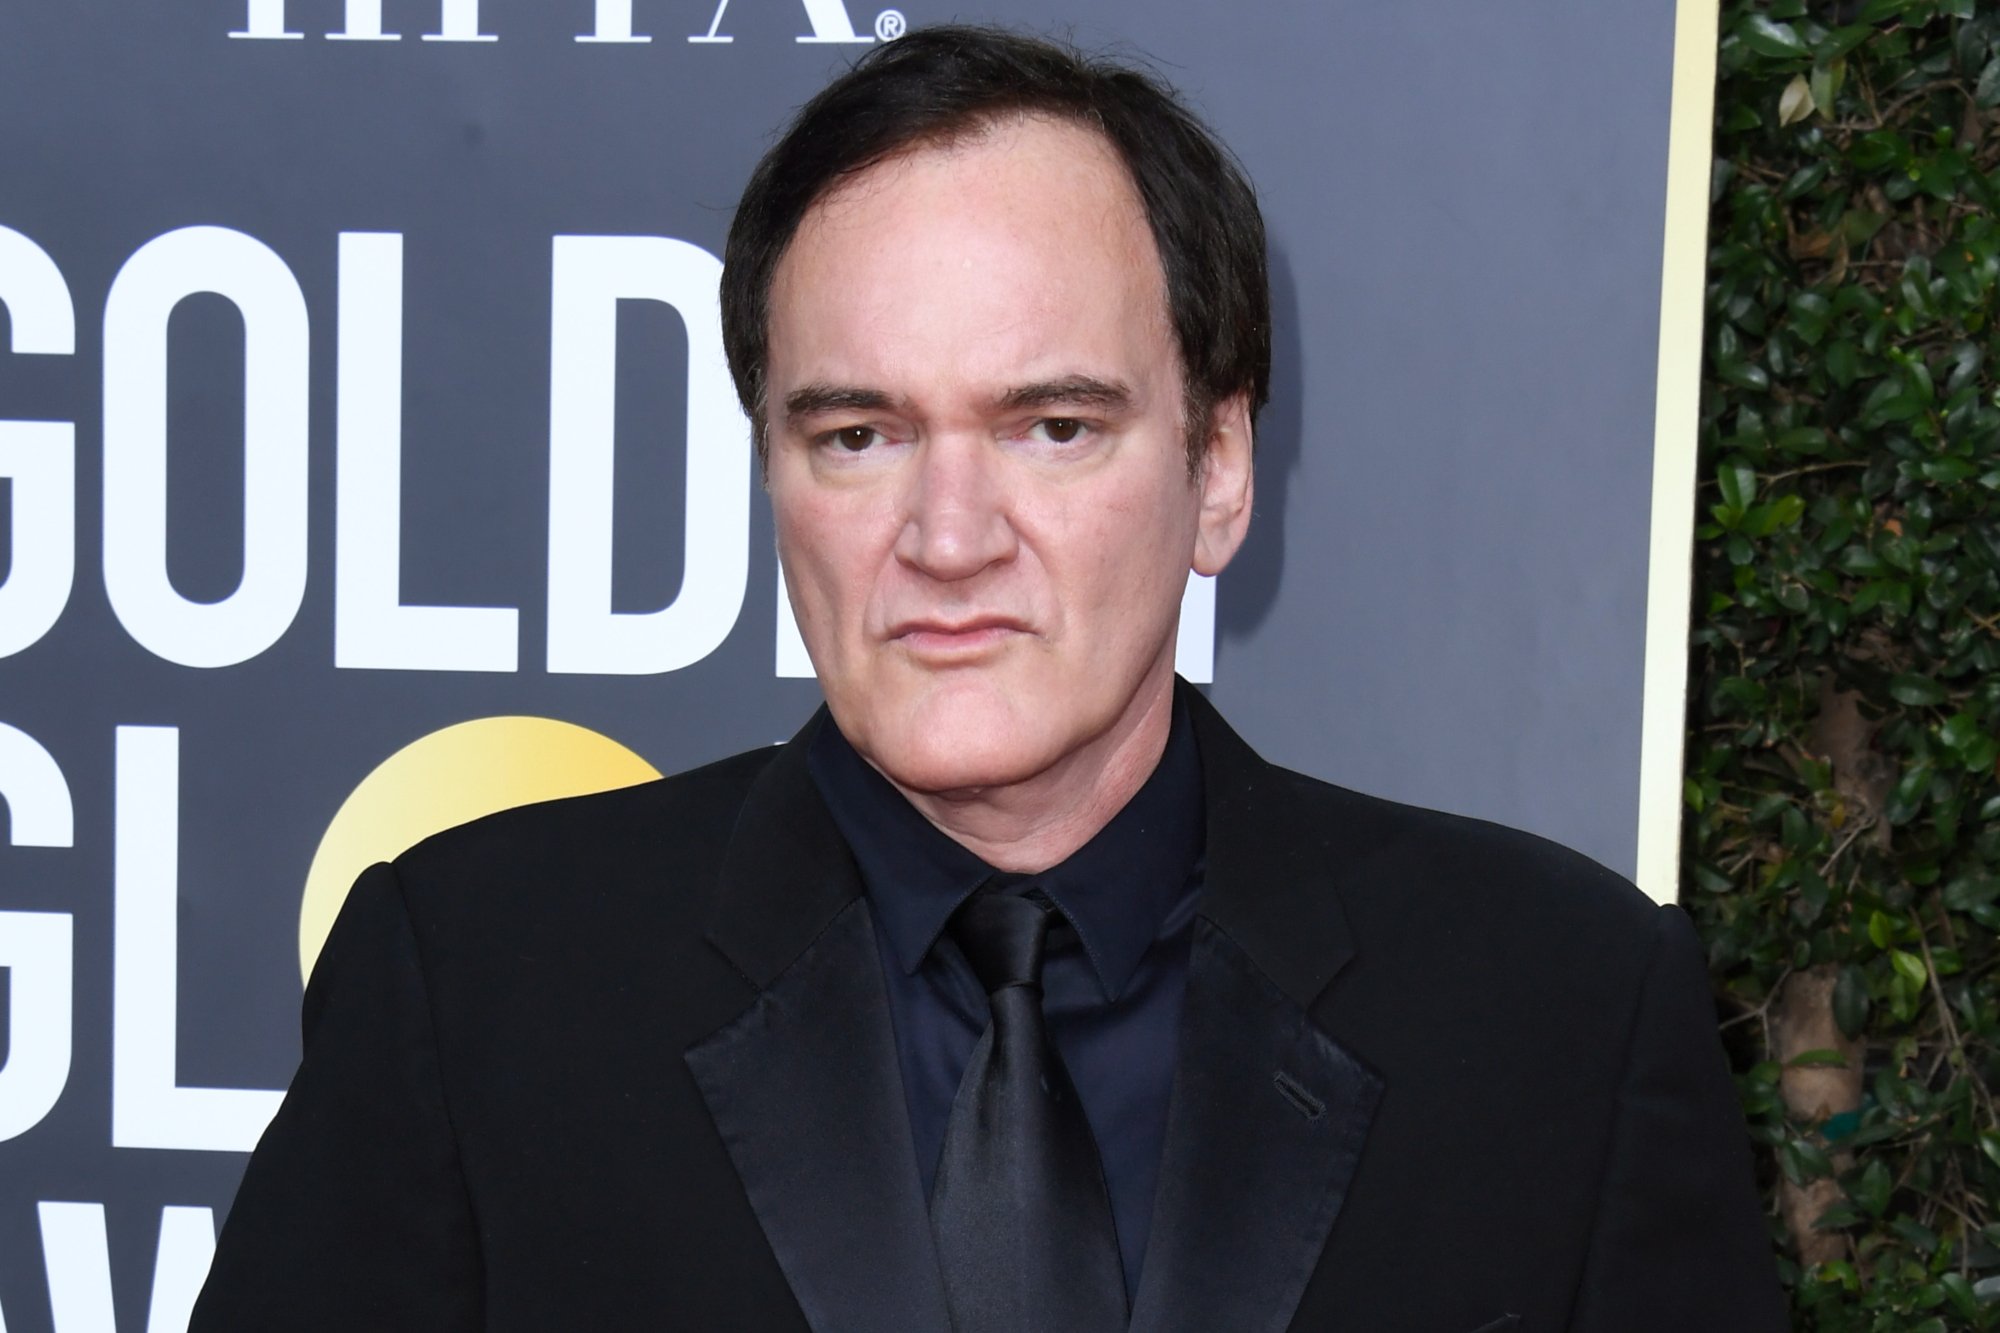 Movie director and screenwriter Quentin Tarantino. He has a plain expression on his face, wearing a black suit, standing in front of a Golden Globes sign.